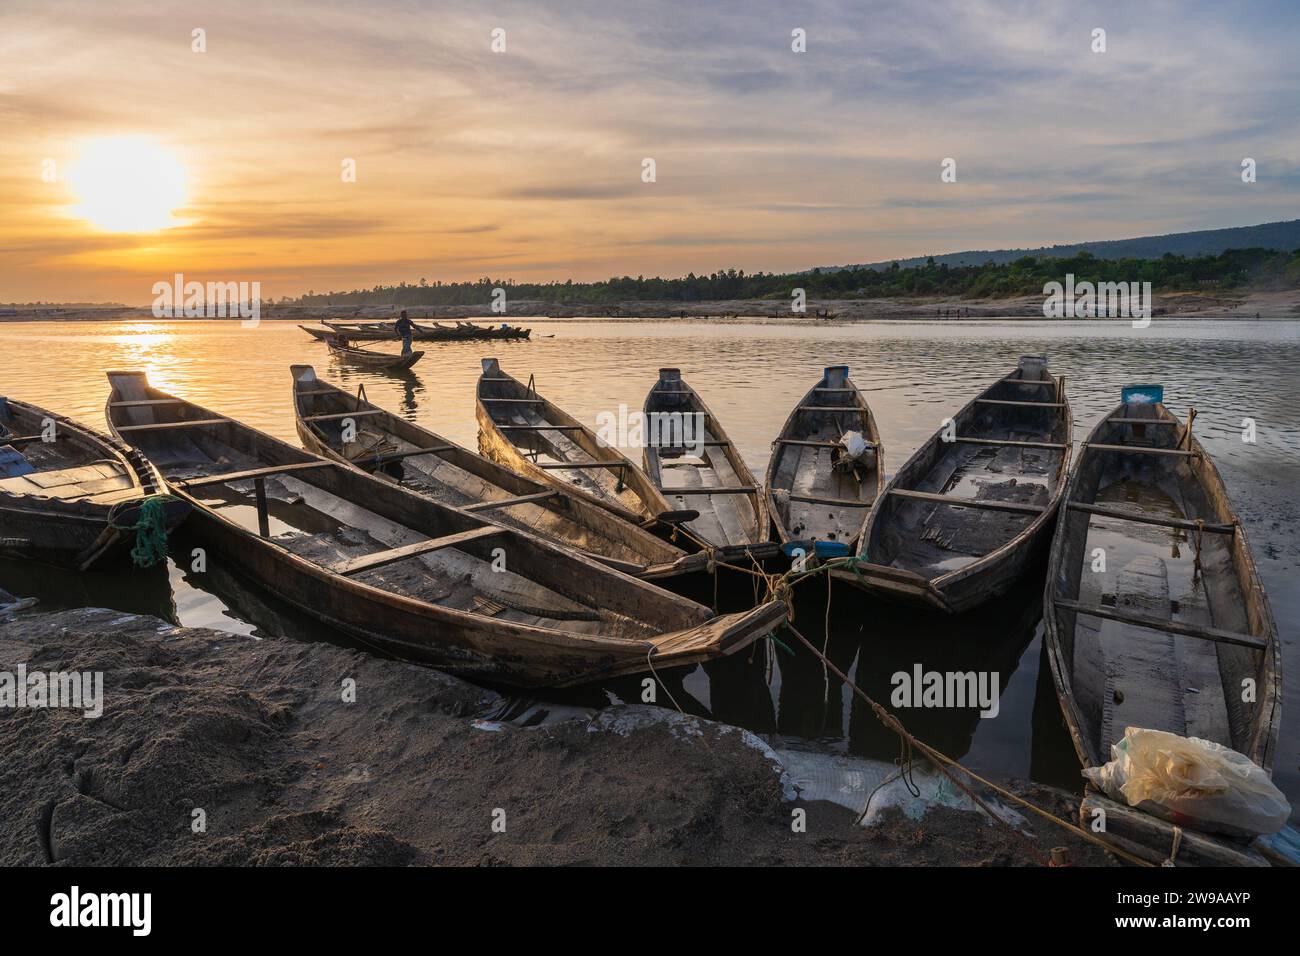 Landscape view of wooden boats on river bank at sunset, Jaflong, Bangladesh Stock Photo